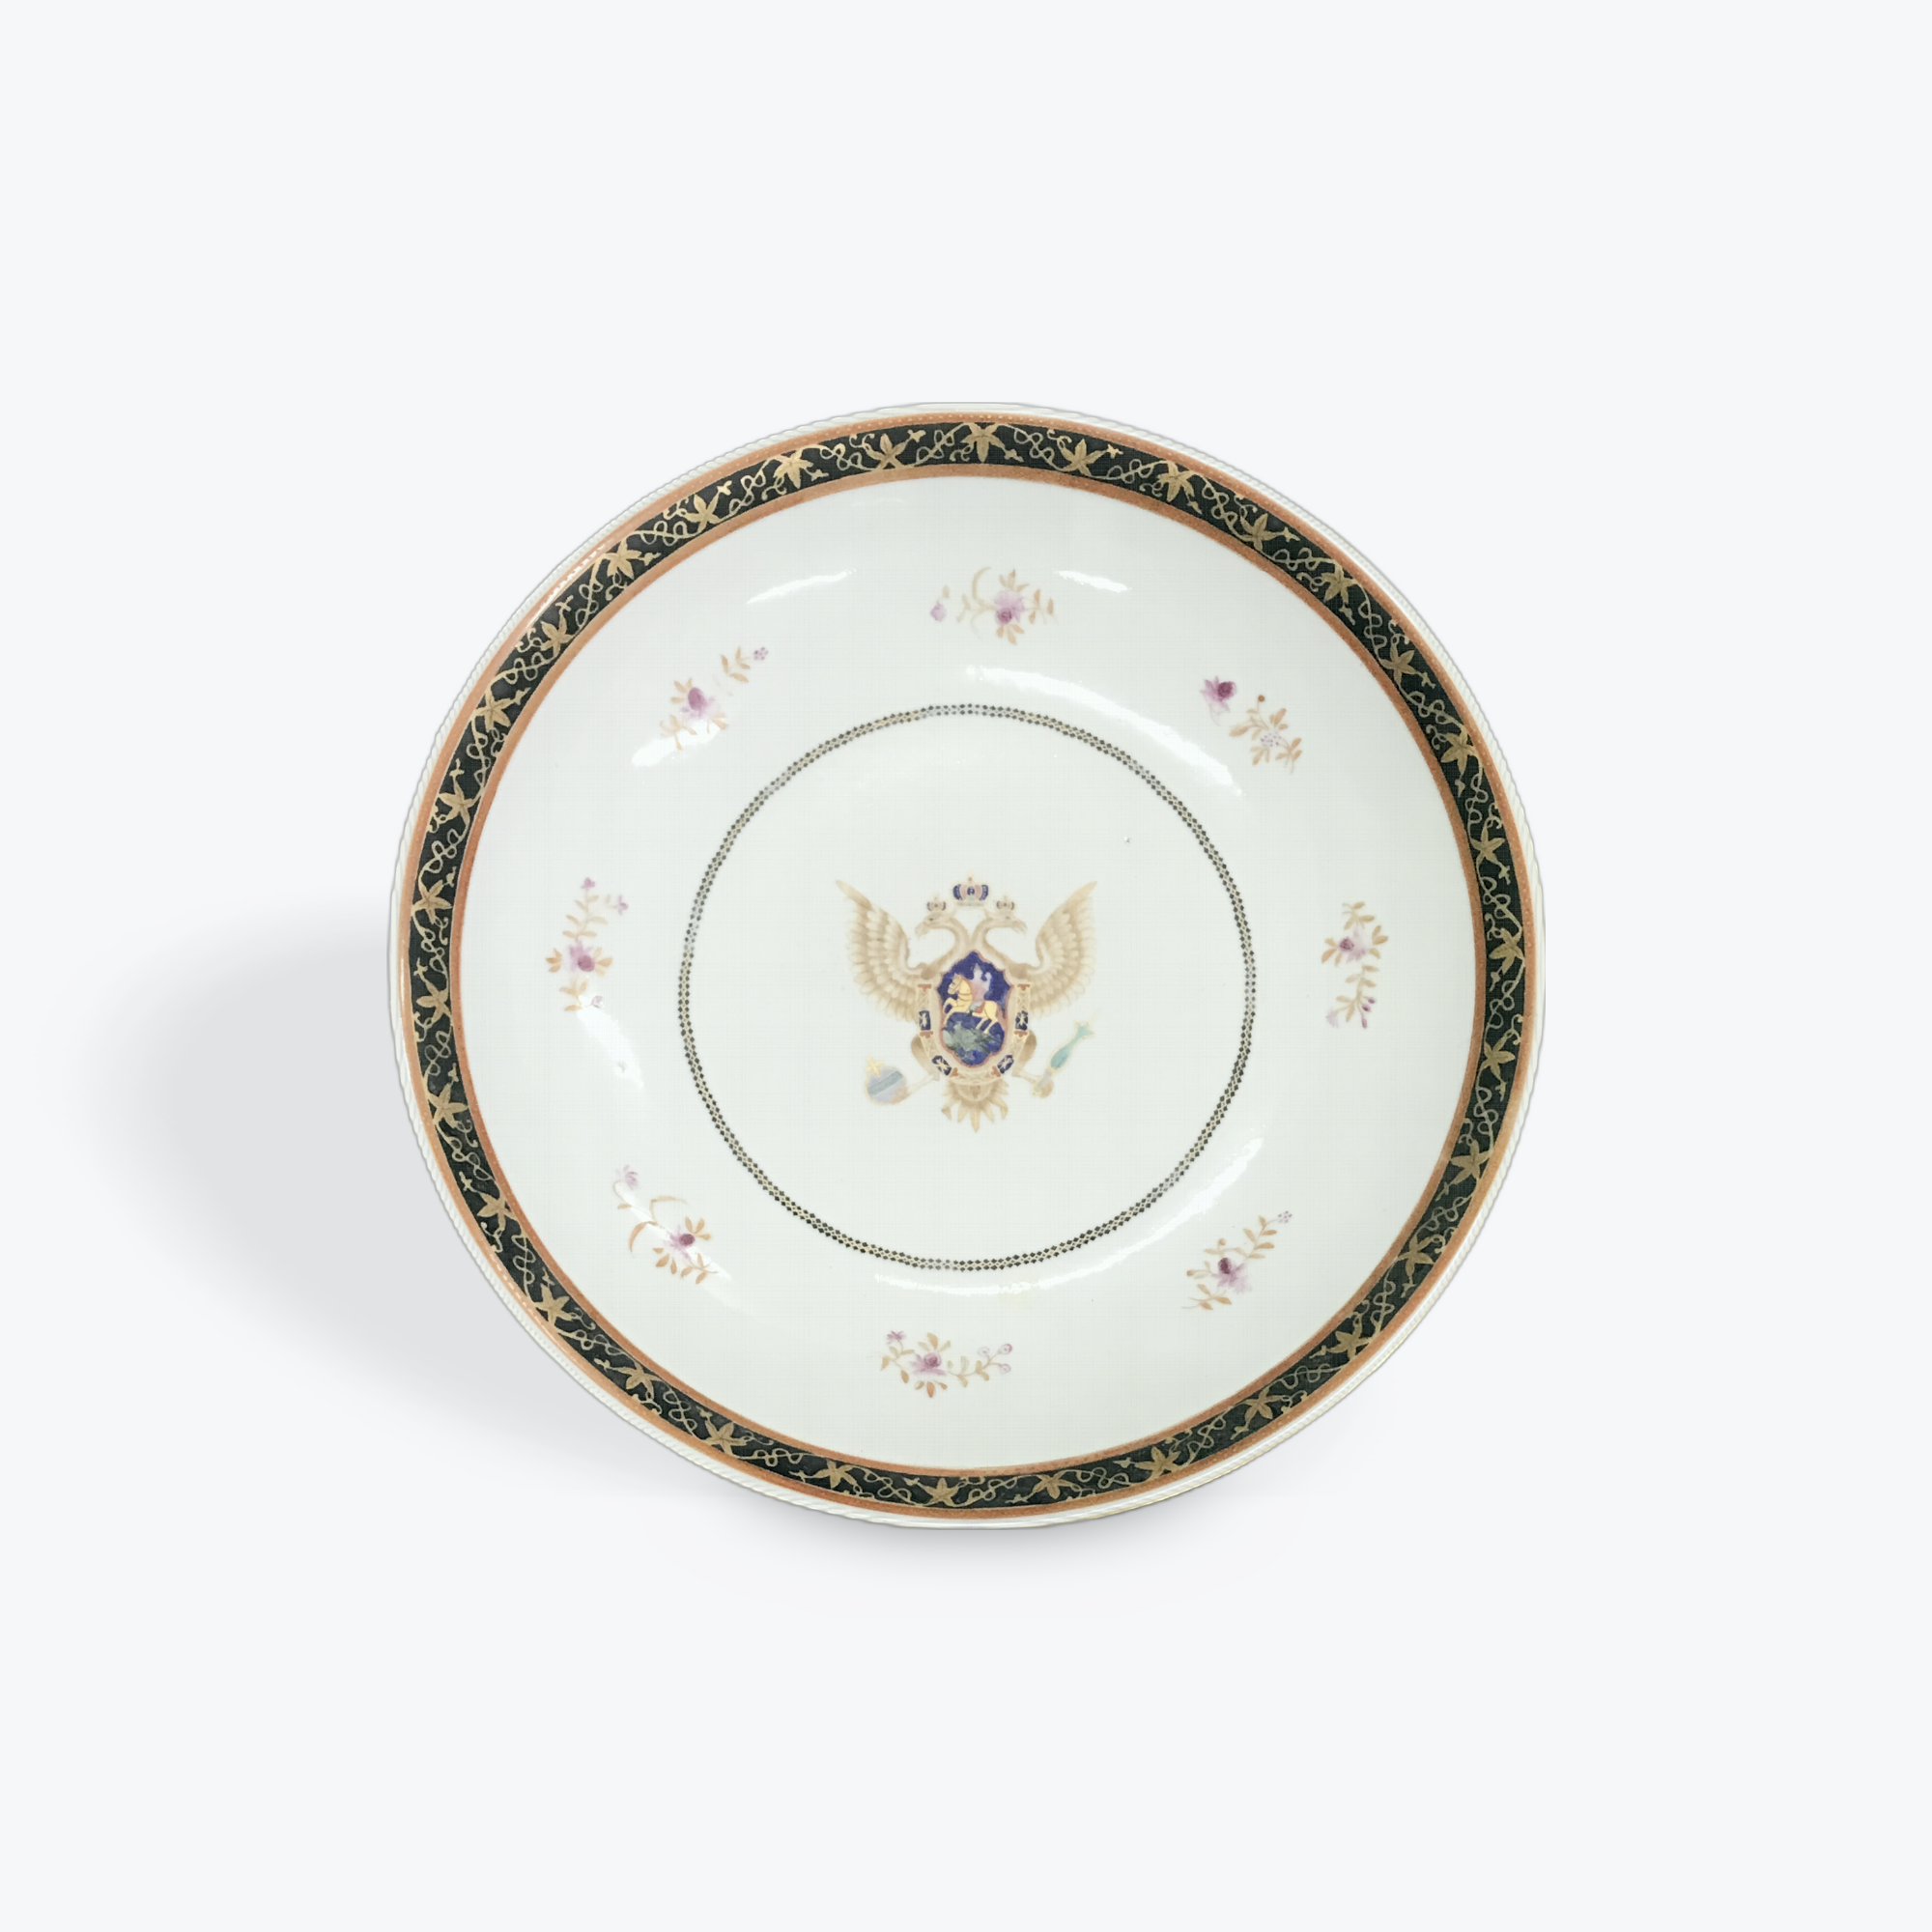 Chinese Export Armorial Porcelain Charger with Russian Coat of Arms, 18th century, 40cm